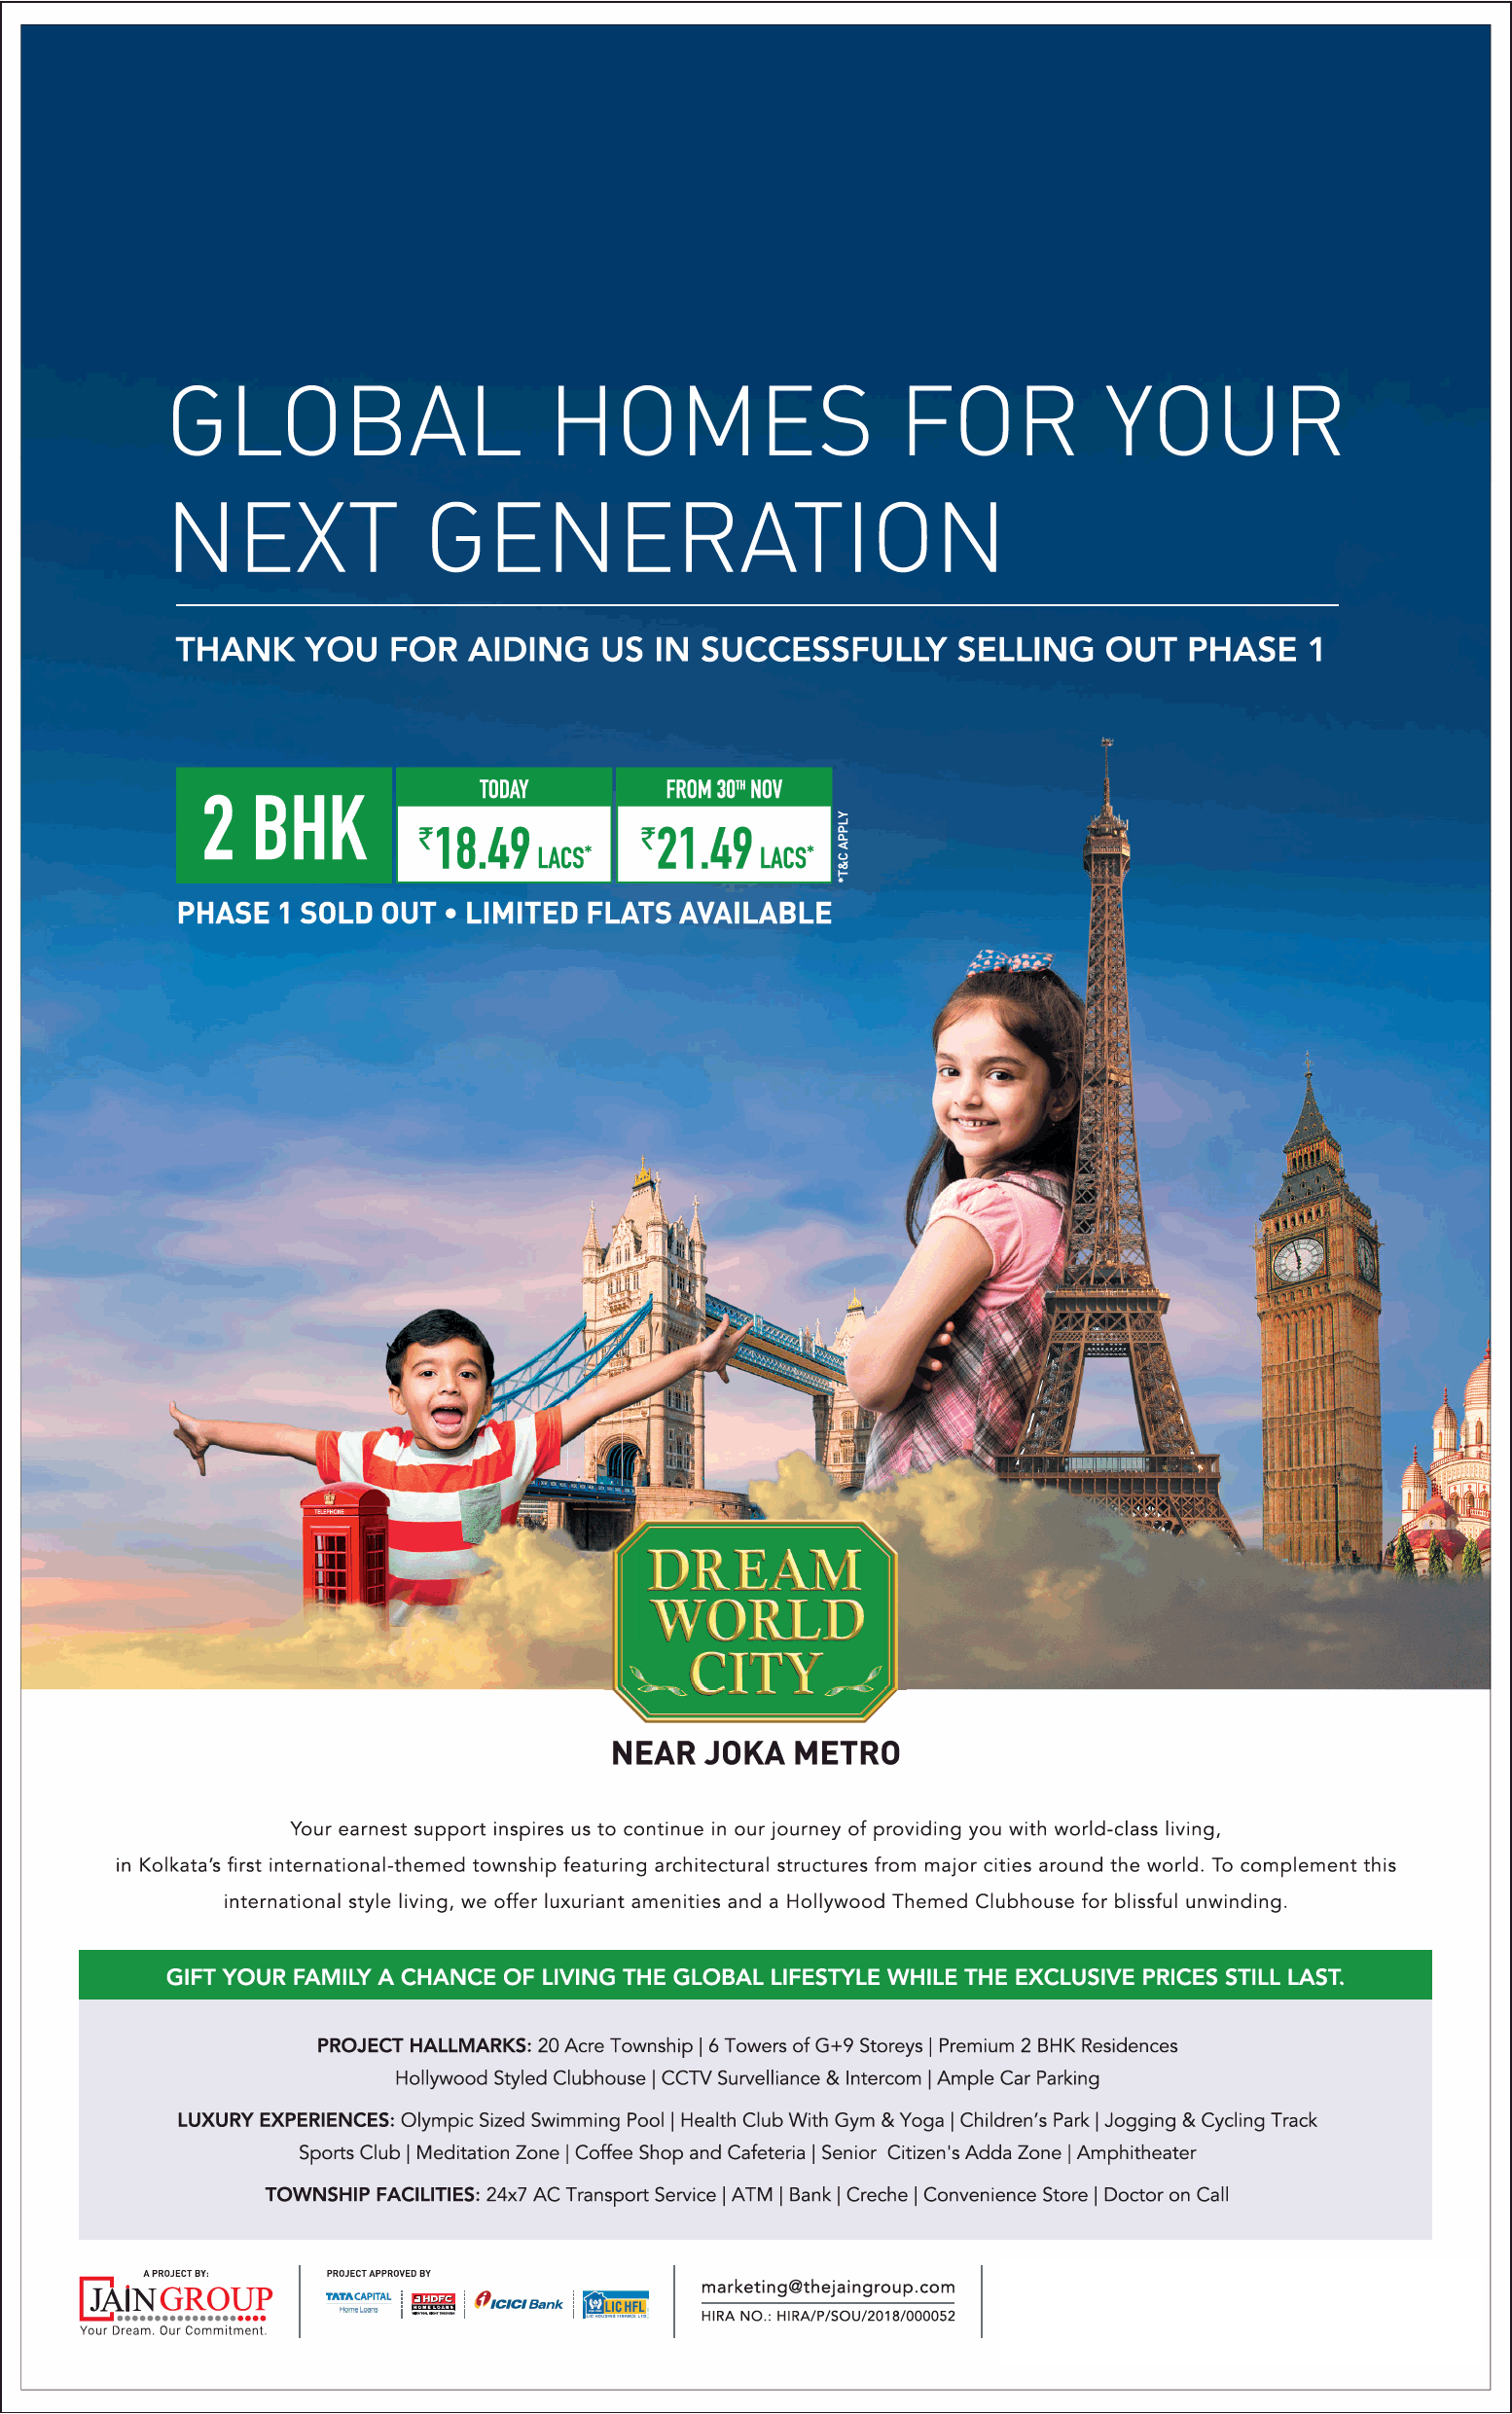 Phase 1 sold out limited flats available at Jain Dream World City in Kolkata